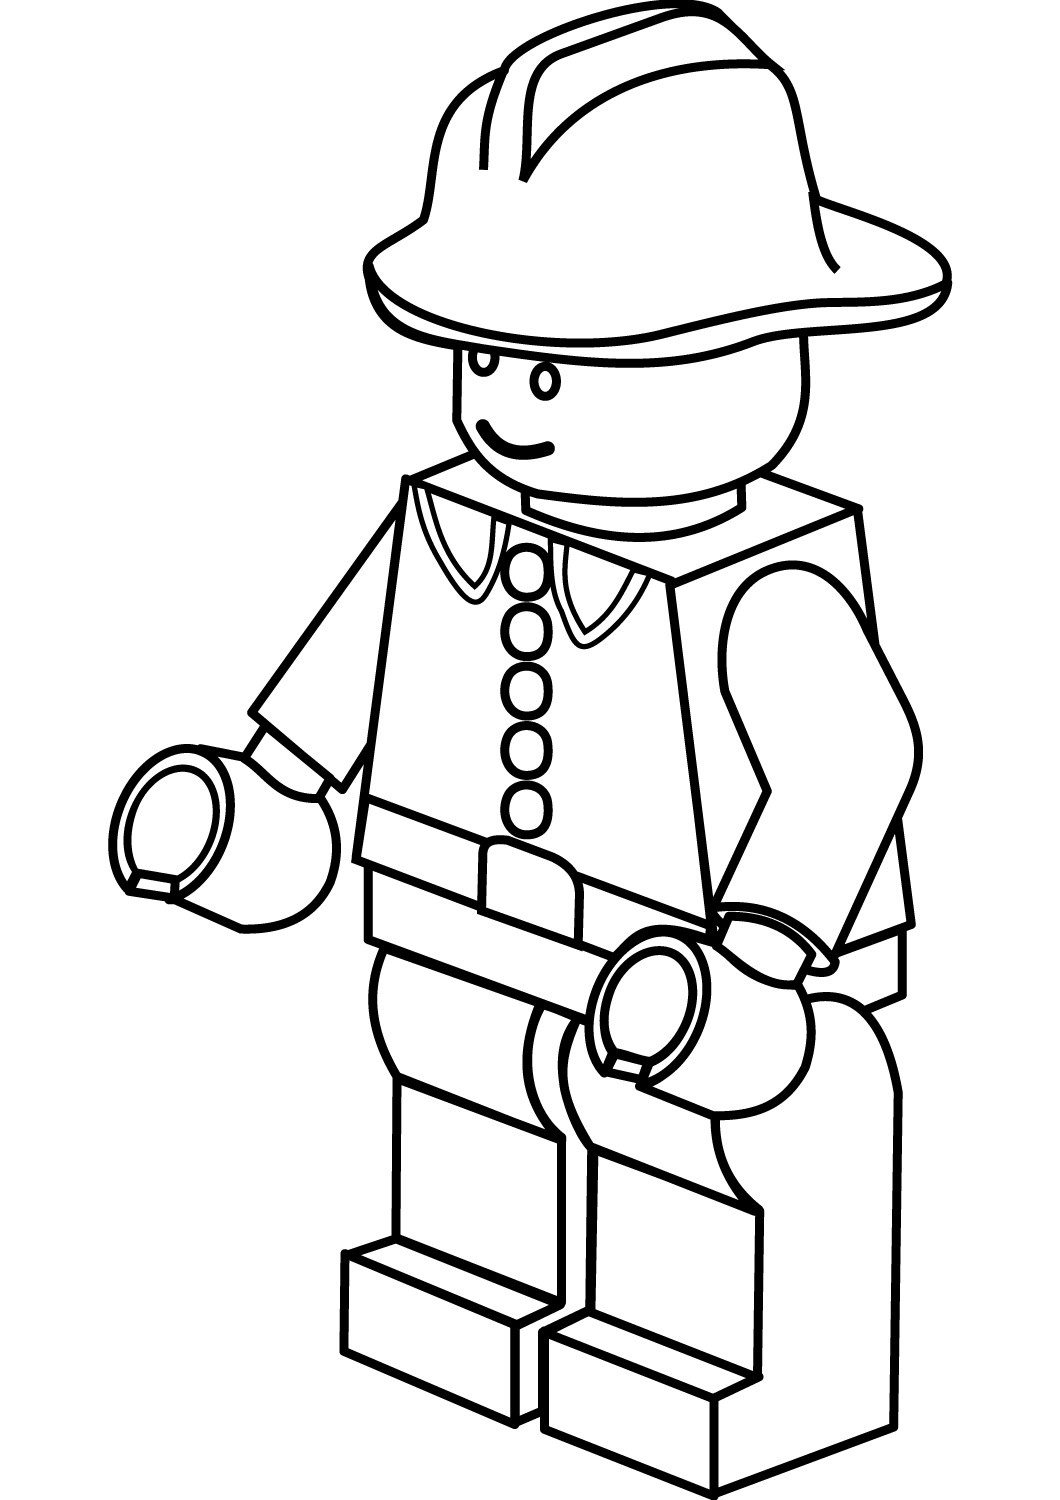 Lego City Firefighter Coloring Pages